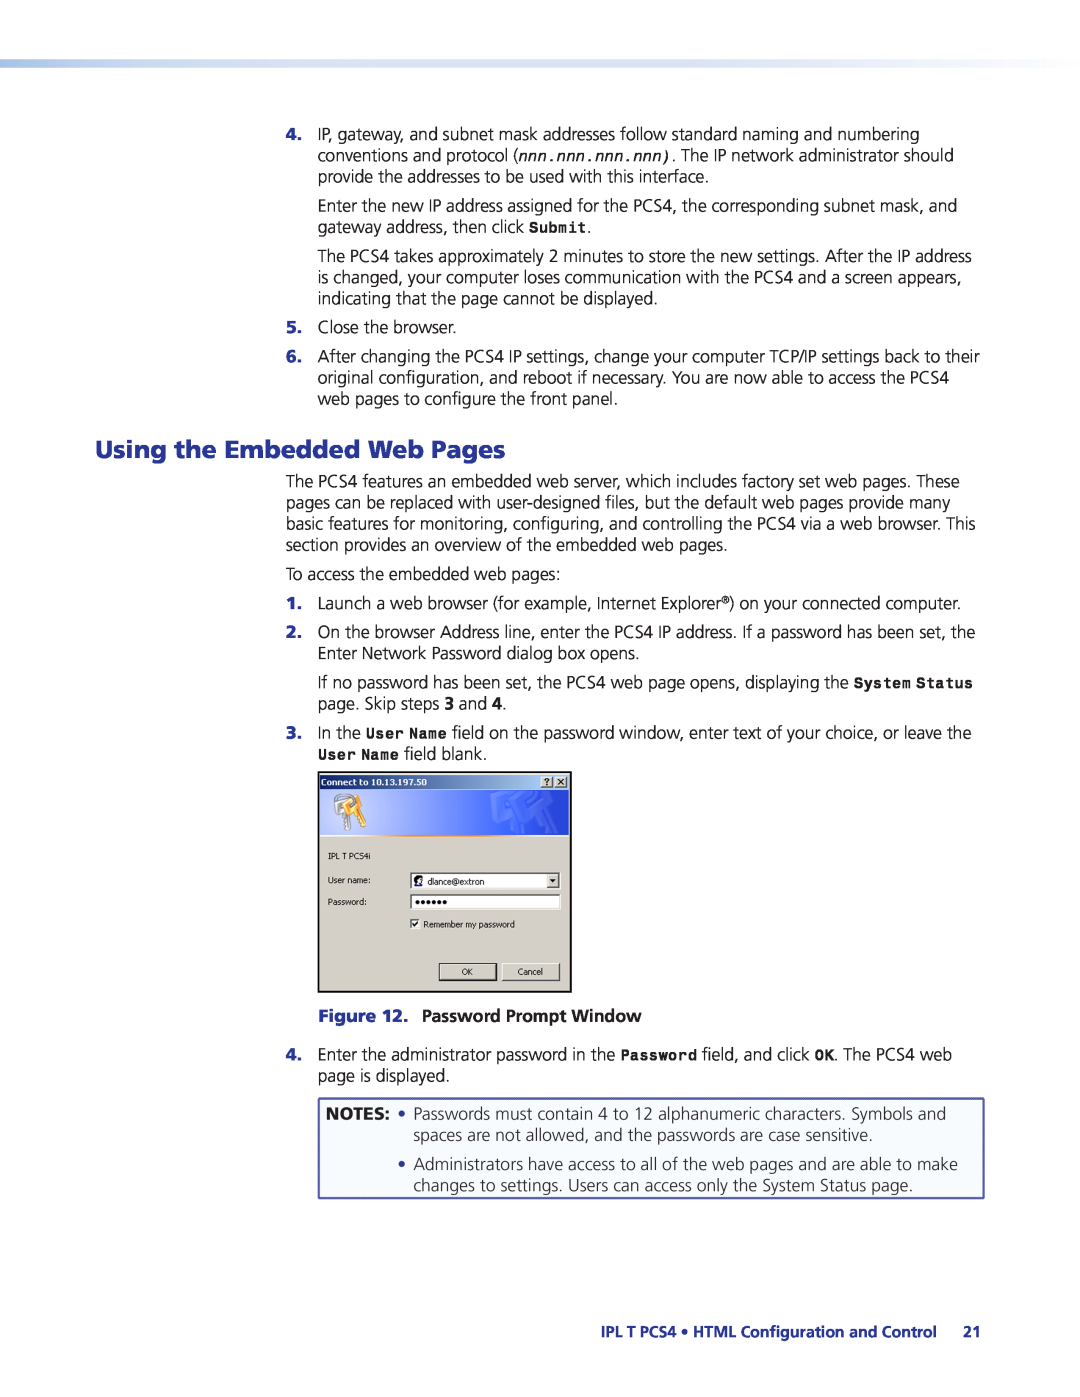 Extron electronic IPL T PCS4i manual Using the Embedded Web Pages, Password Prompt Window 